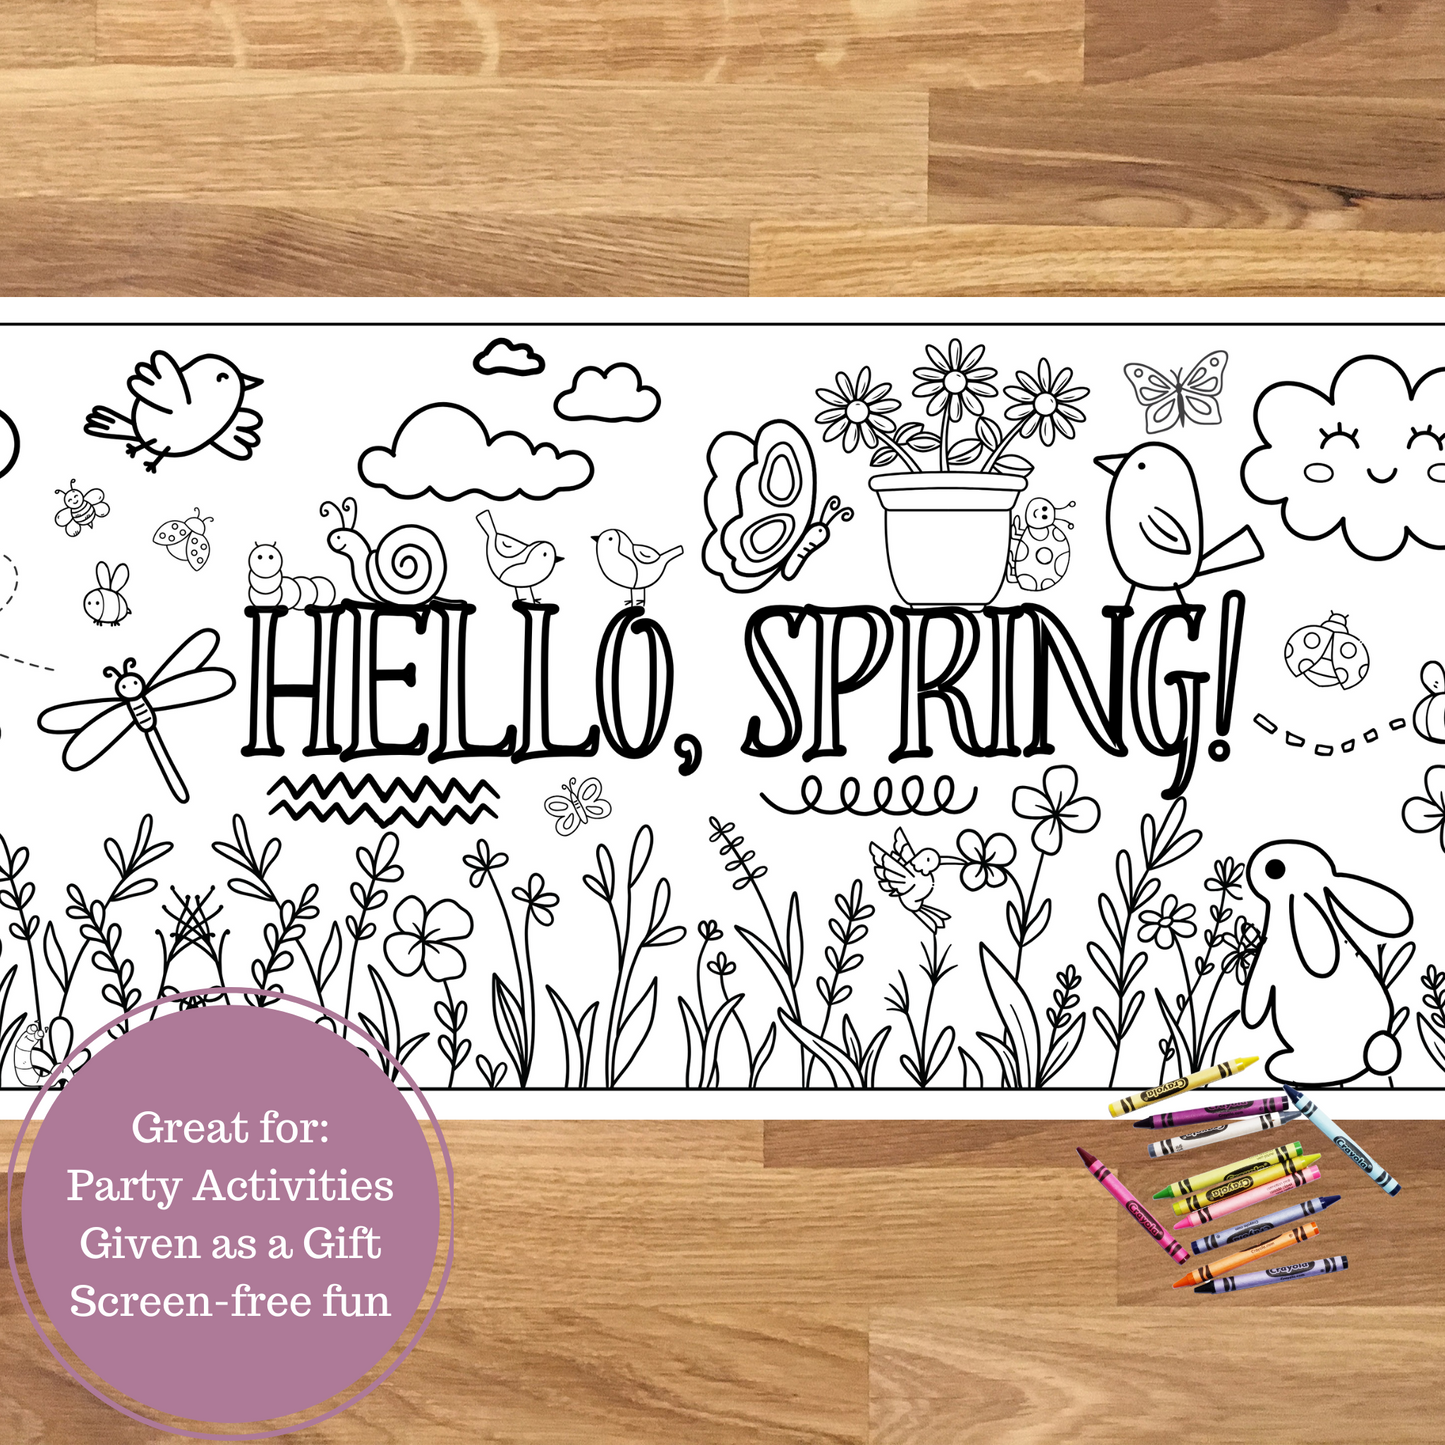 Hello Spring Table Runner | Spring Coloring Page